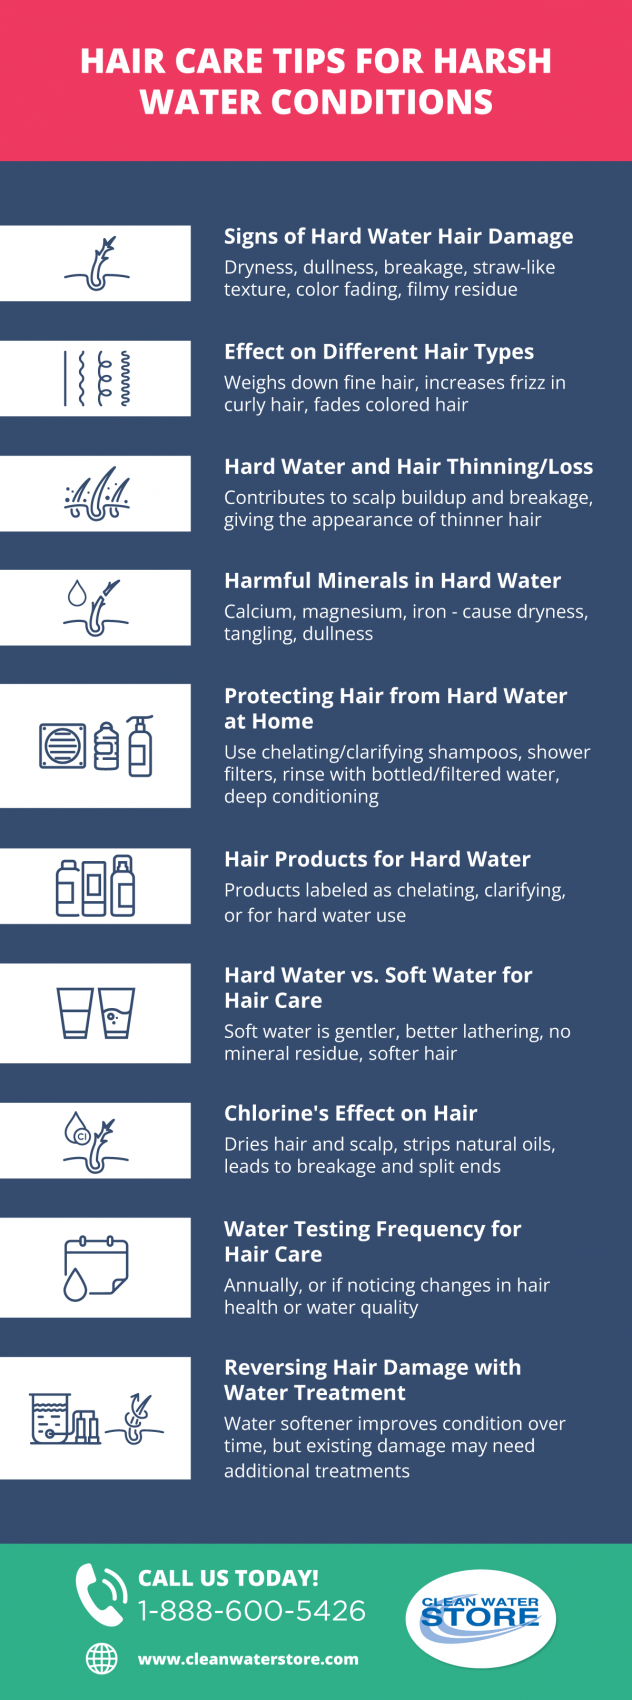 well water hair damage tips